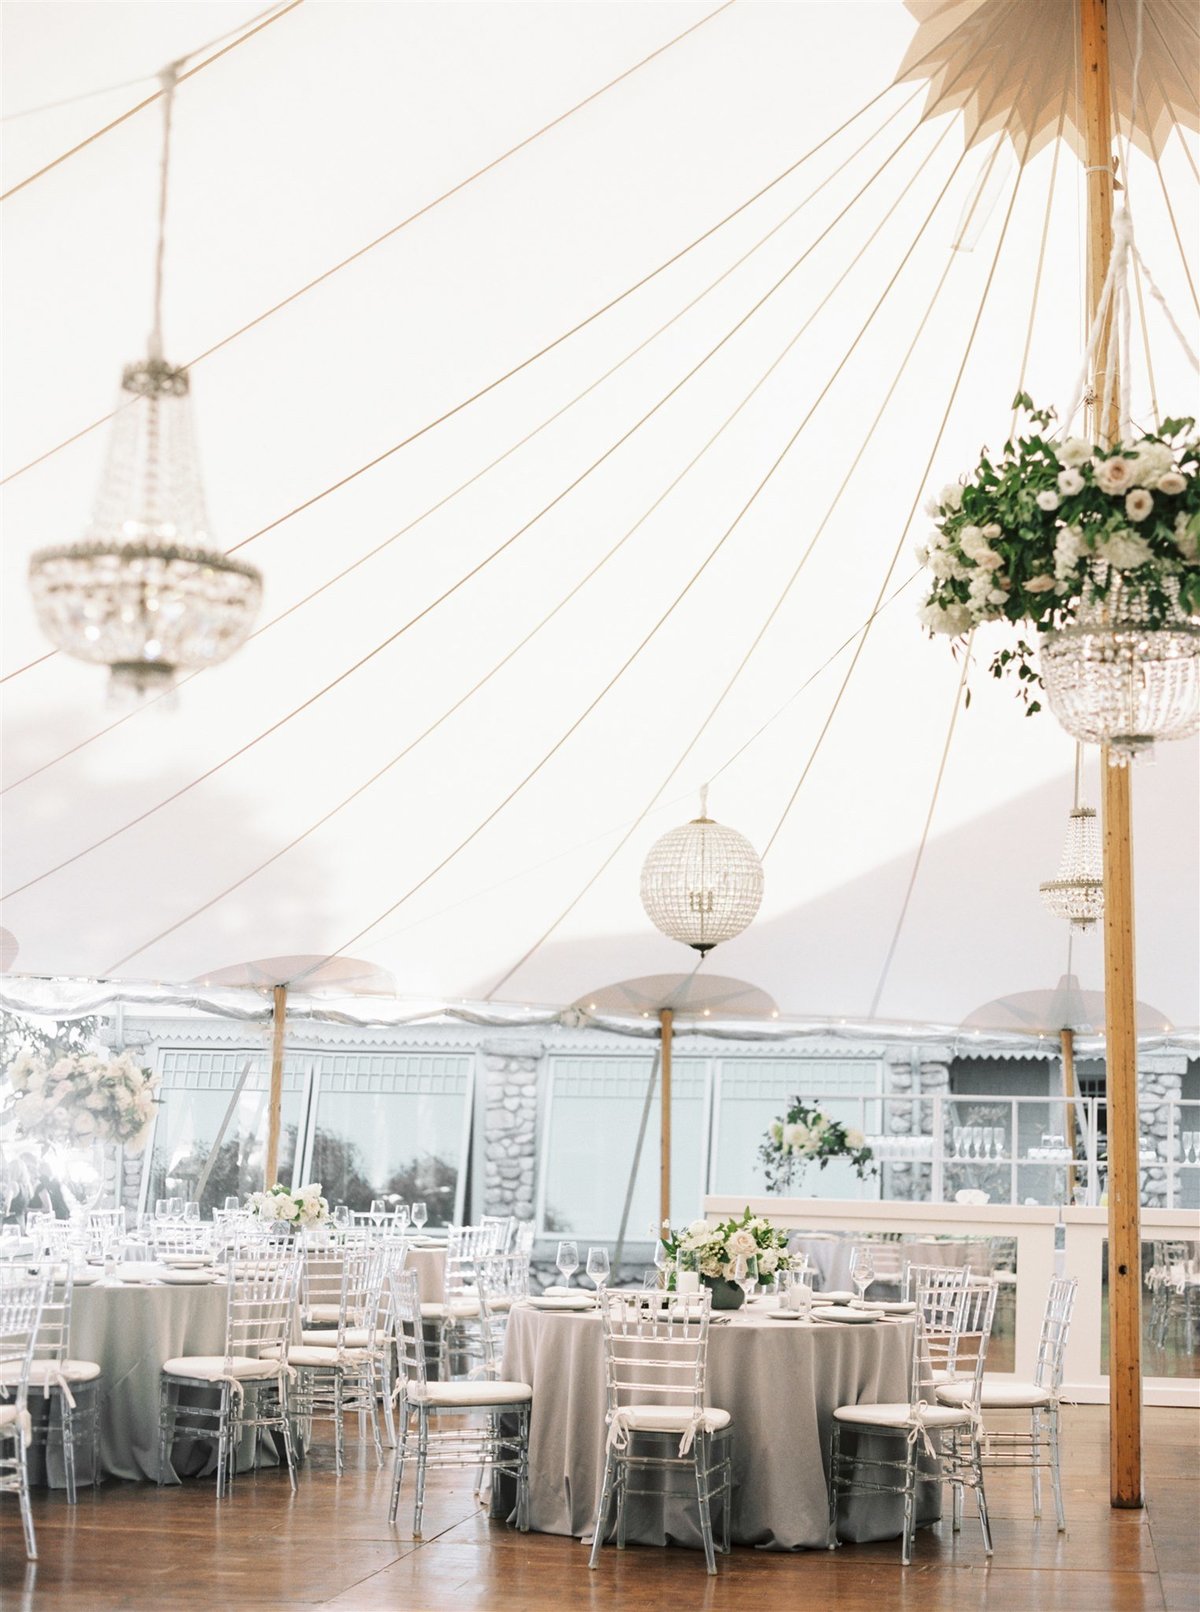 Cape Cod Tented Wedding for Tory and Ugo21